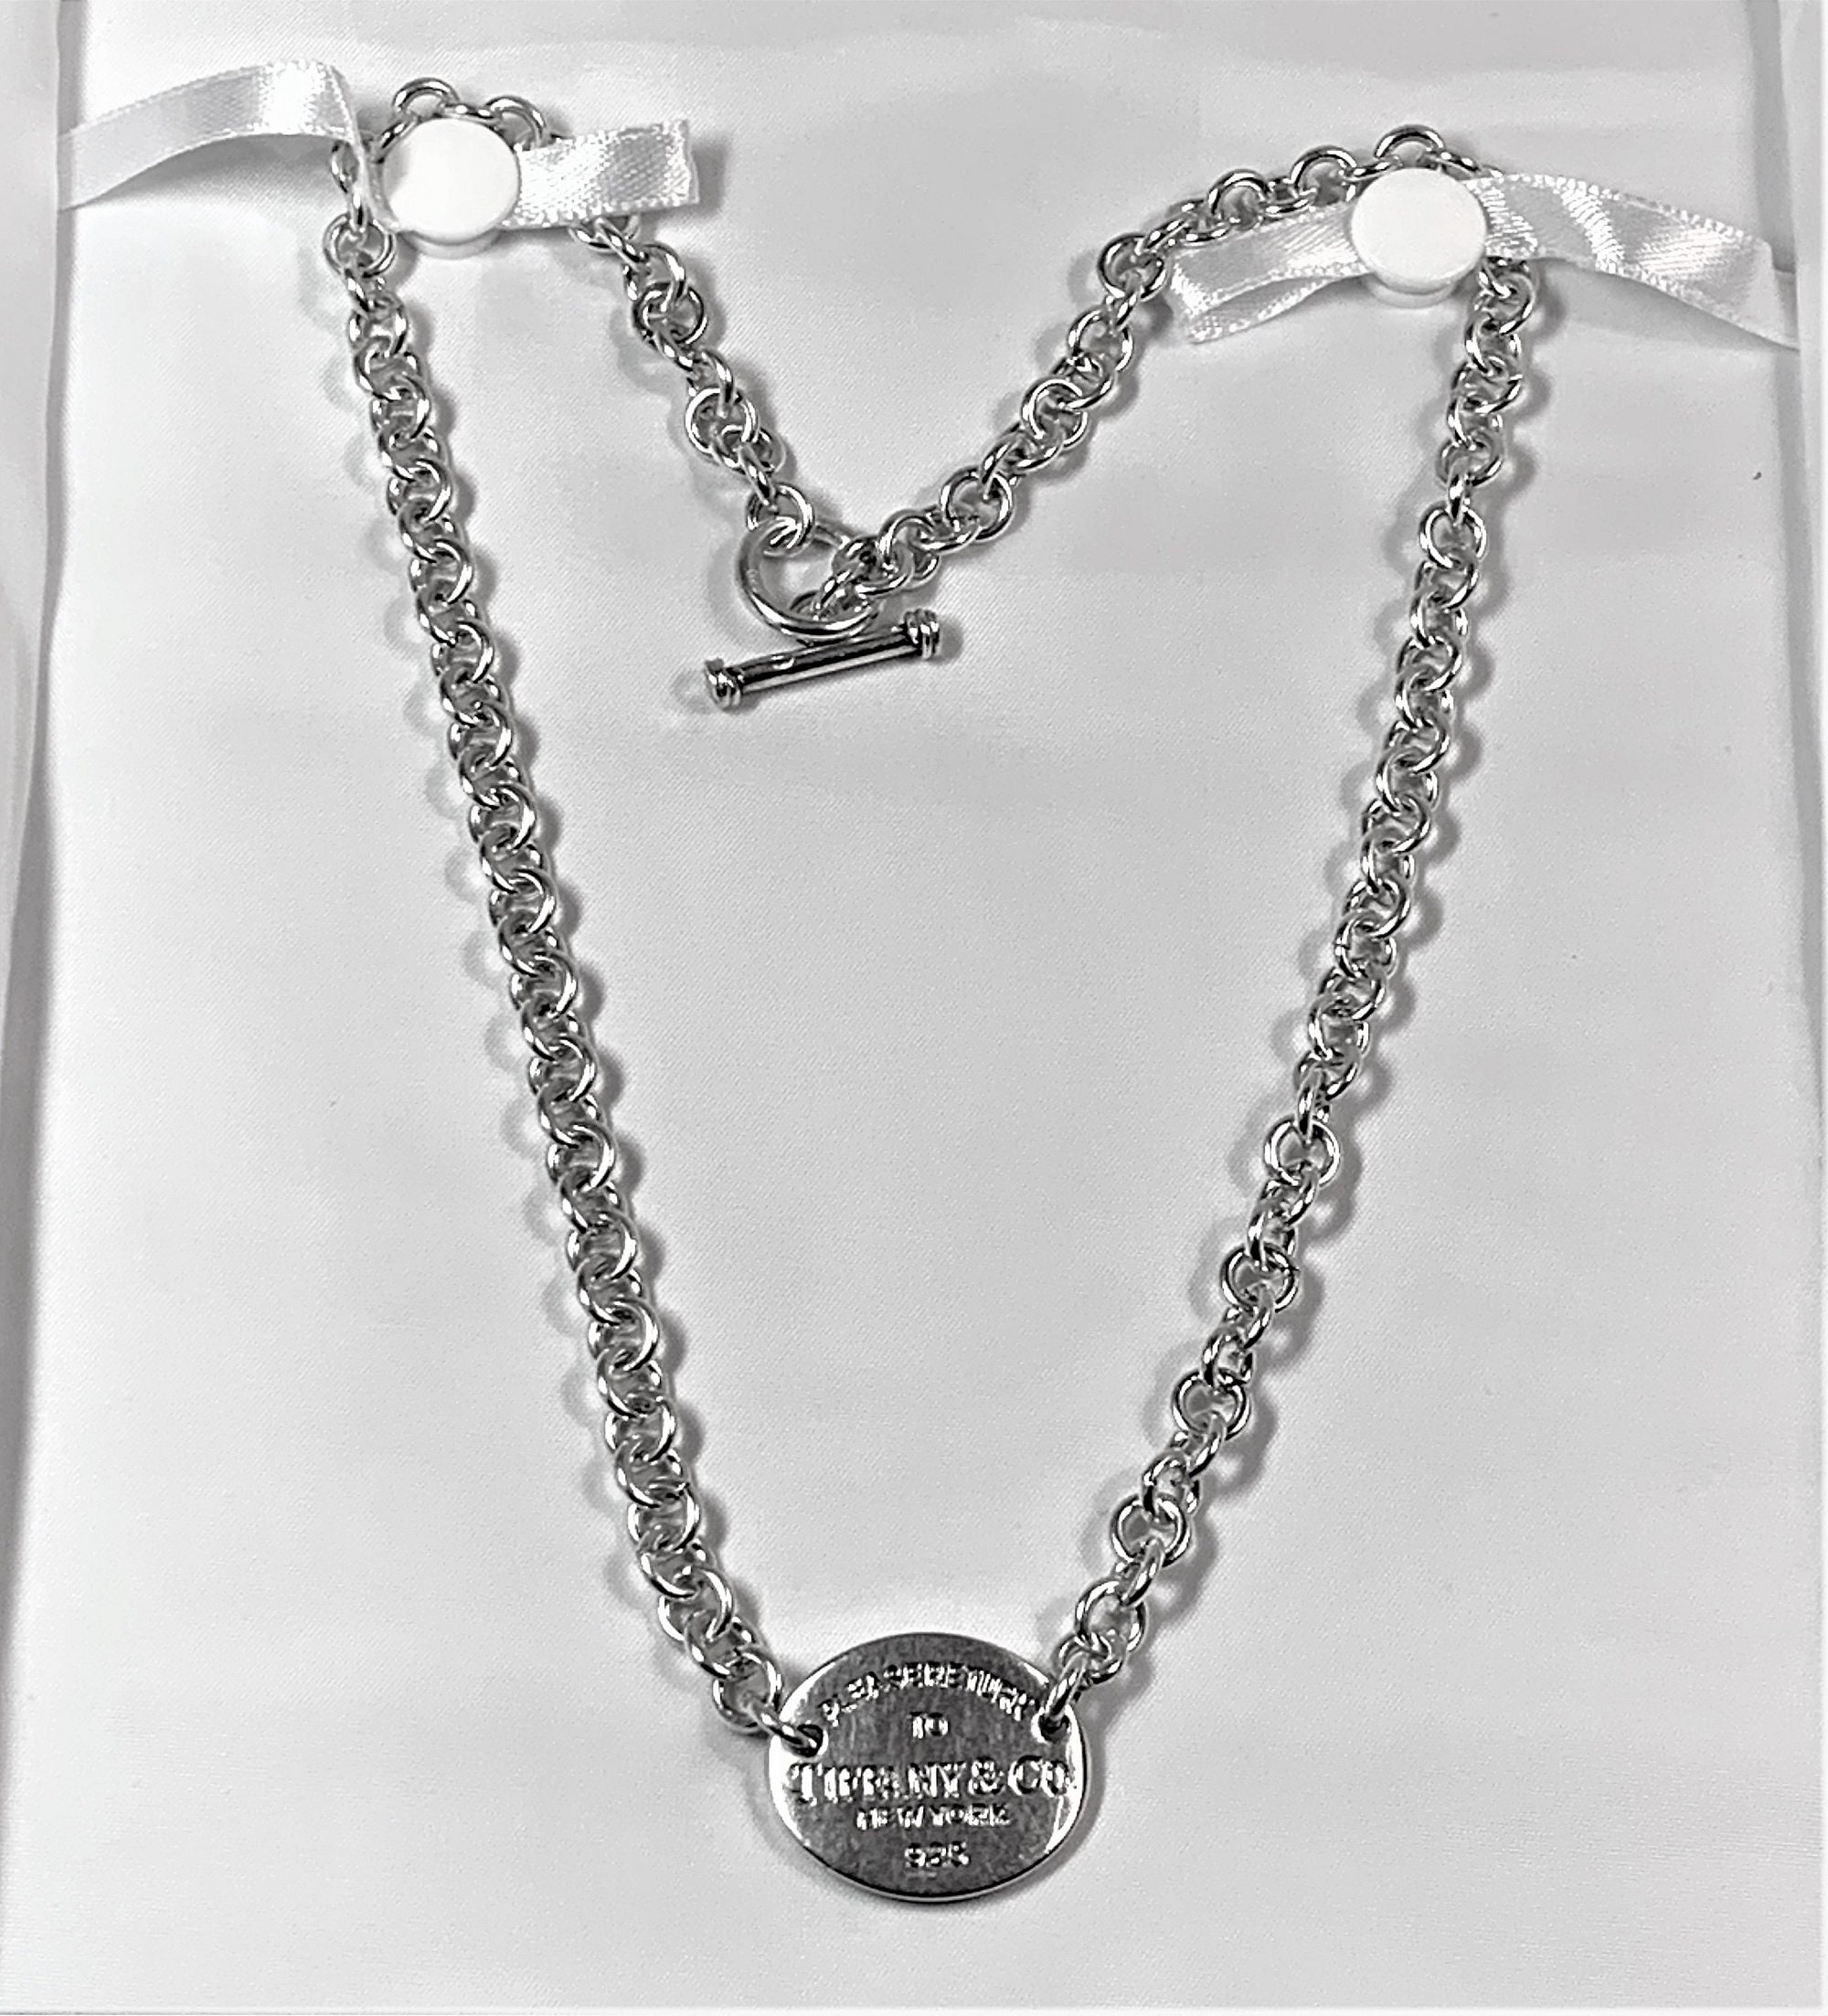 Authentic Tiffany & Co. Tag Necklace Please Return To Tiffany in